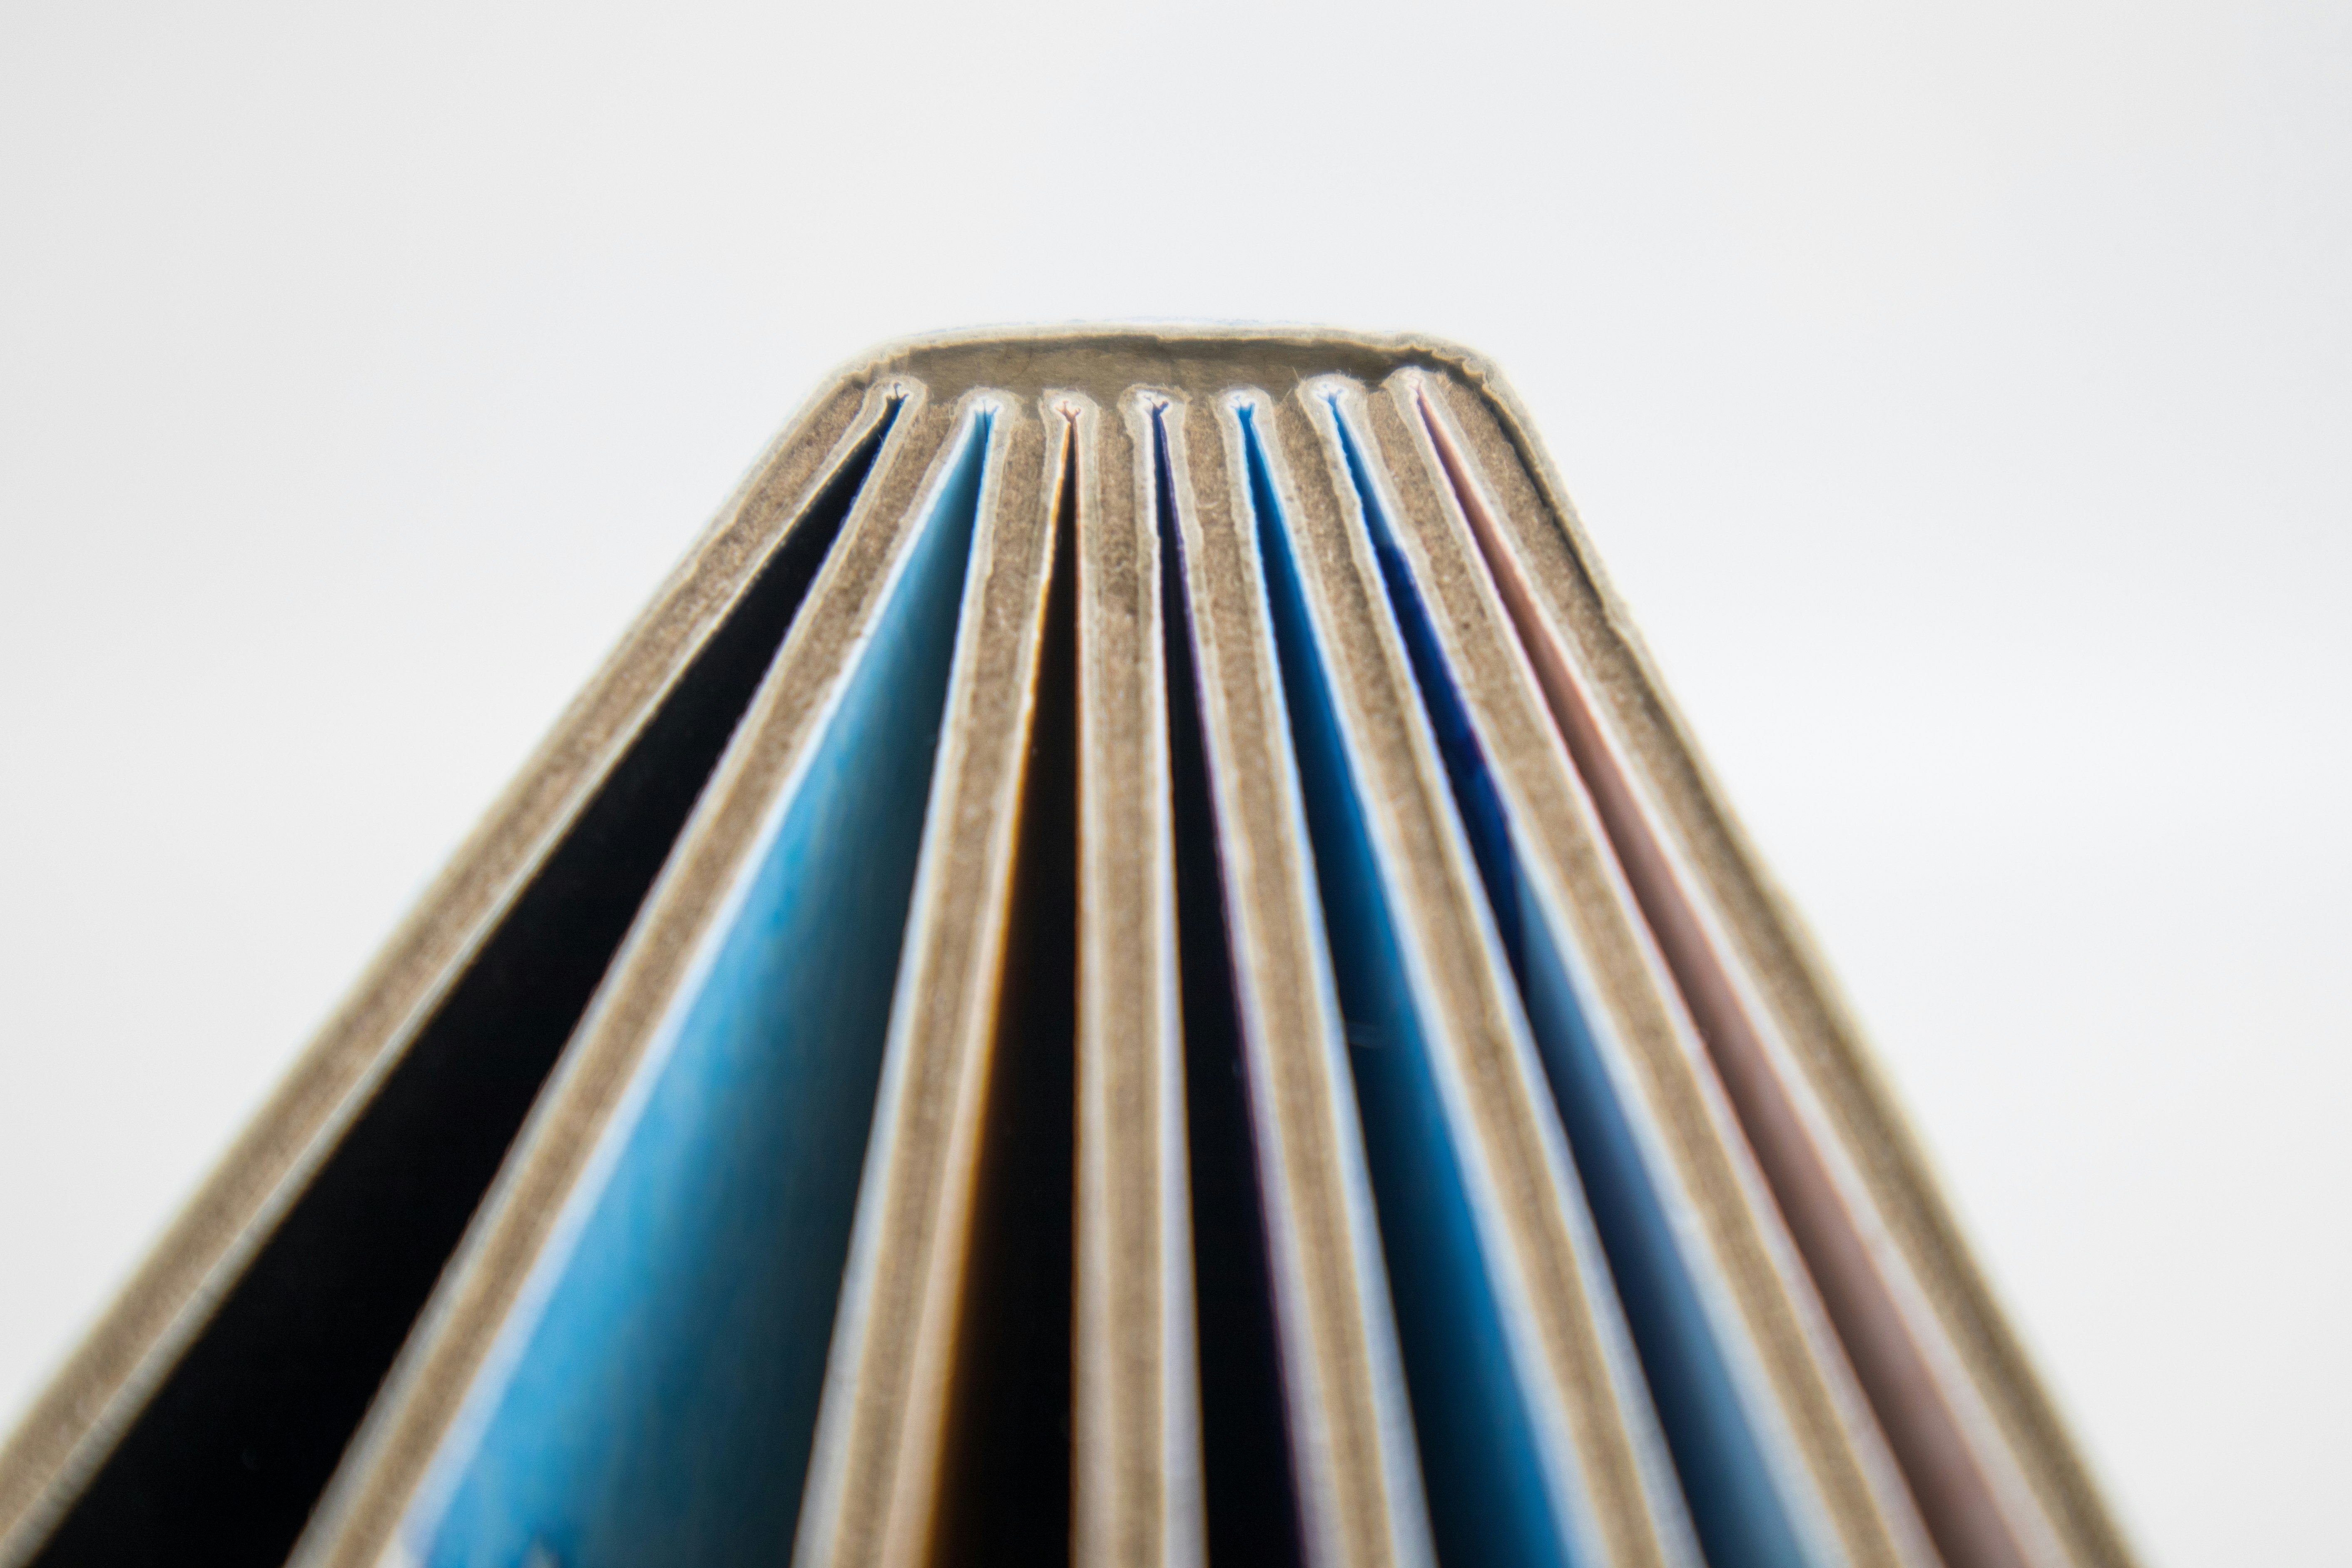 spine and pages of a board book